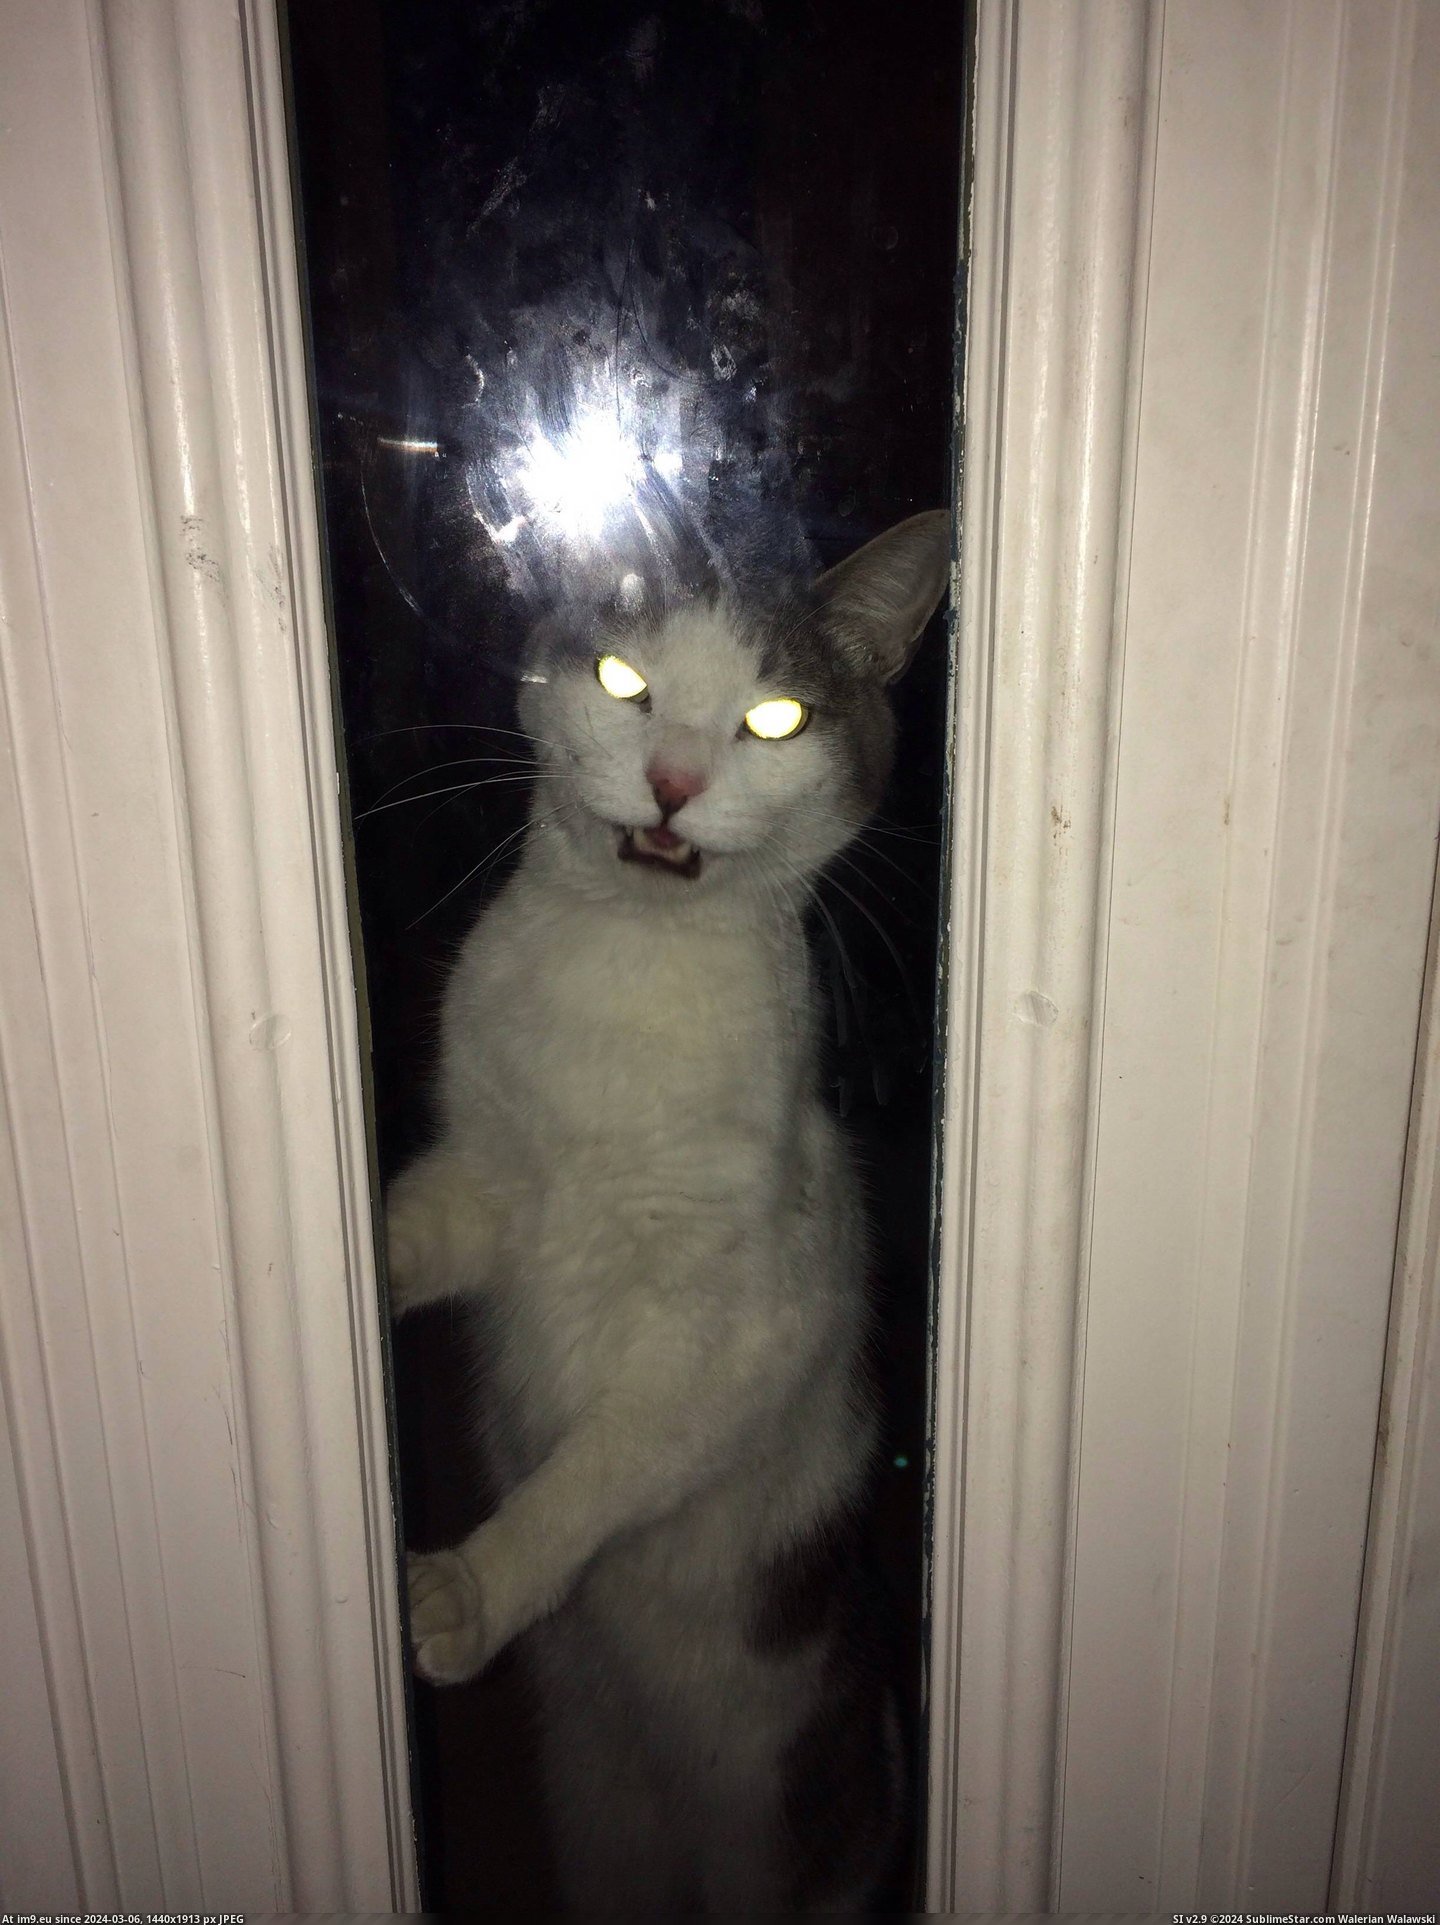 #Cat #House #Our #Neighbor #Pissed #Let #Him #Won [Aww] My neighbor's cat is pissed because we won't let him in our house. Pic. (Изображение из альбом My r/AWW favs))